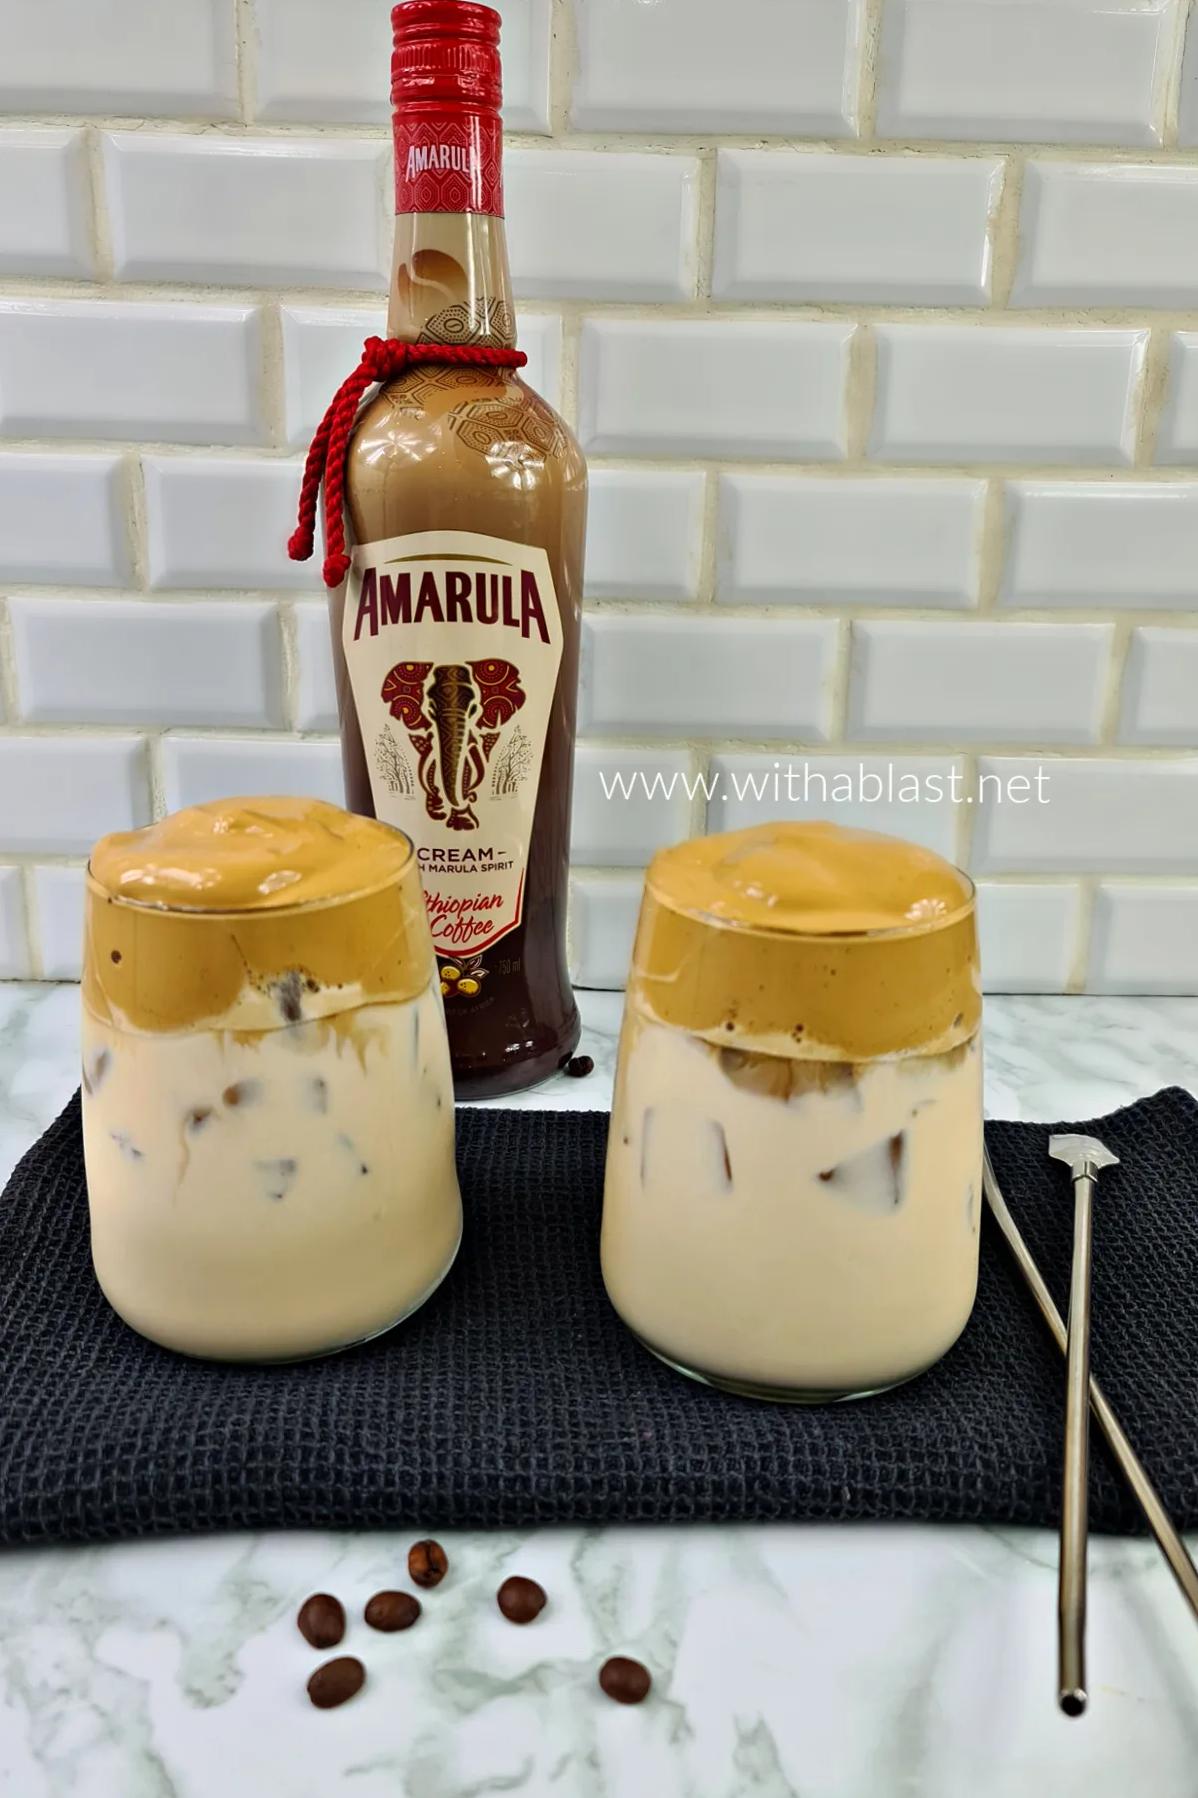  Take a sip, close your eyes, and indulge in the rich, smooth combination of coffee and Amarula.